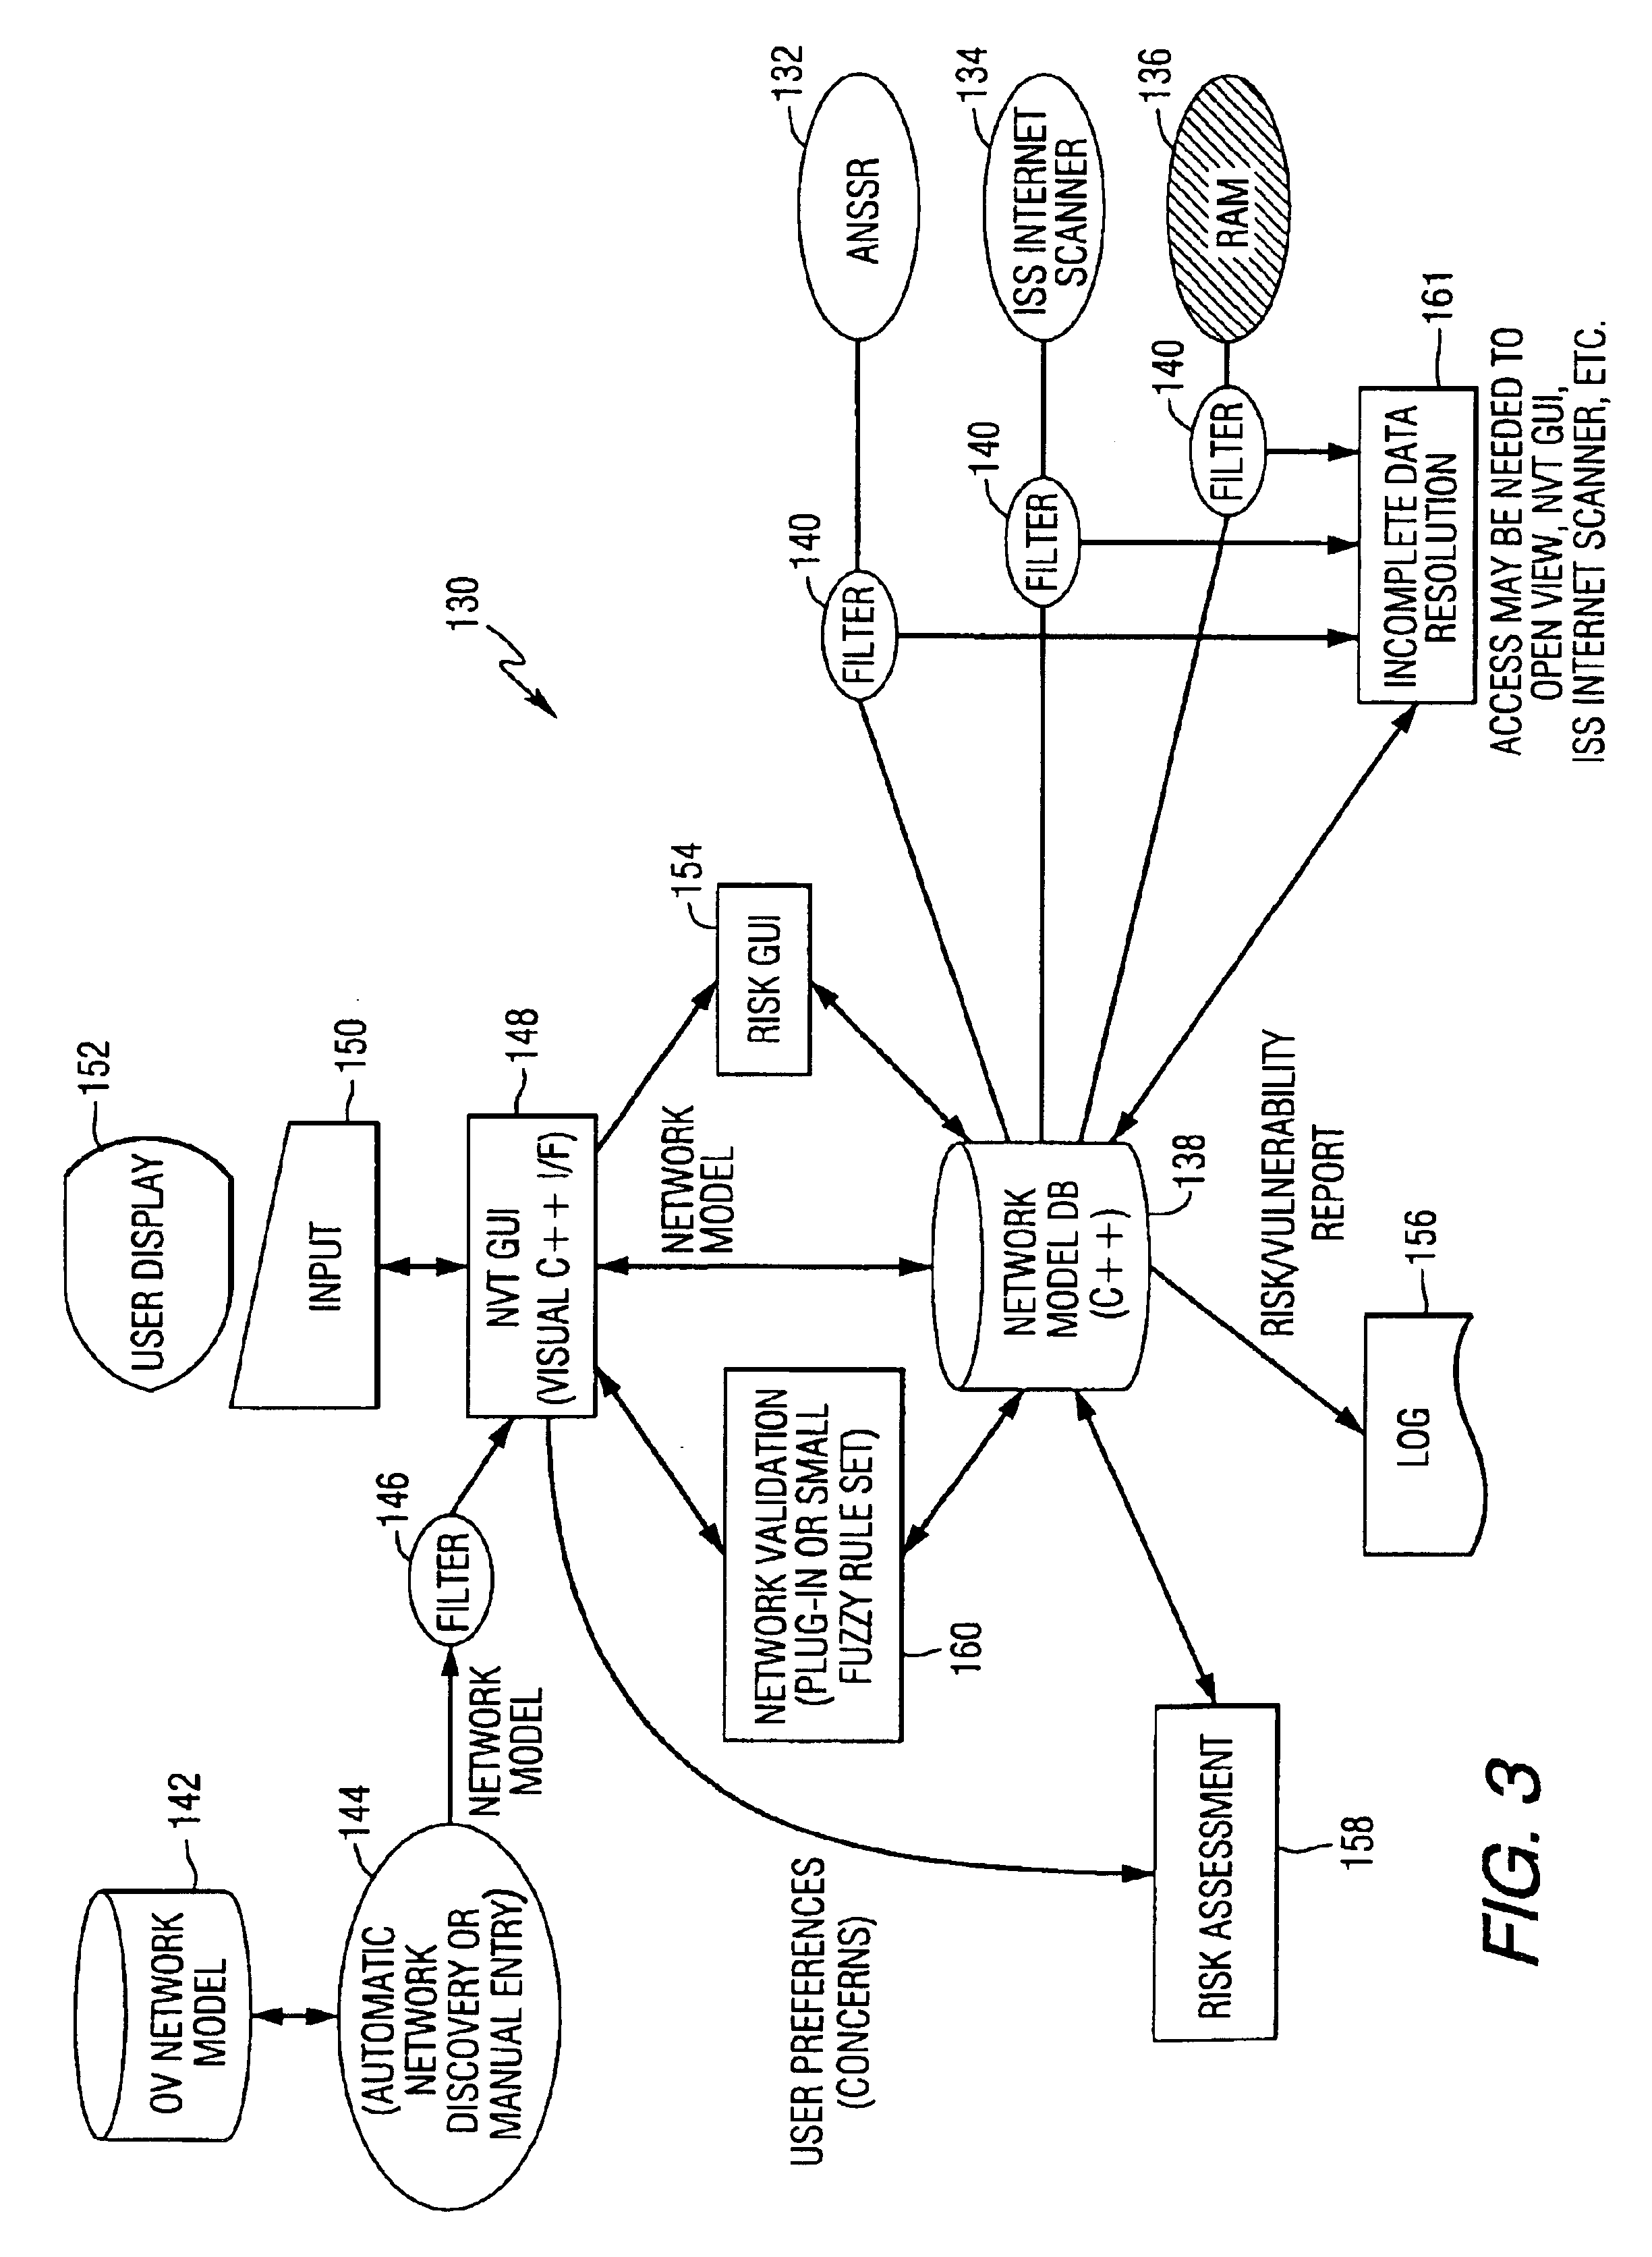 System and method for assessing the security posture of a network using goal oriented fuzzy logic decision rules